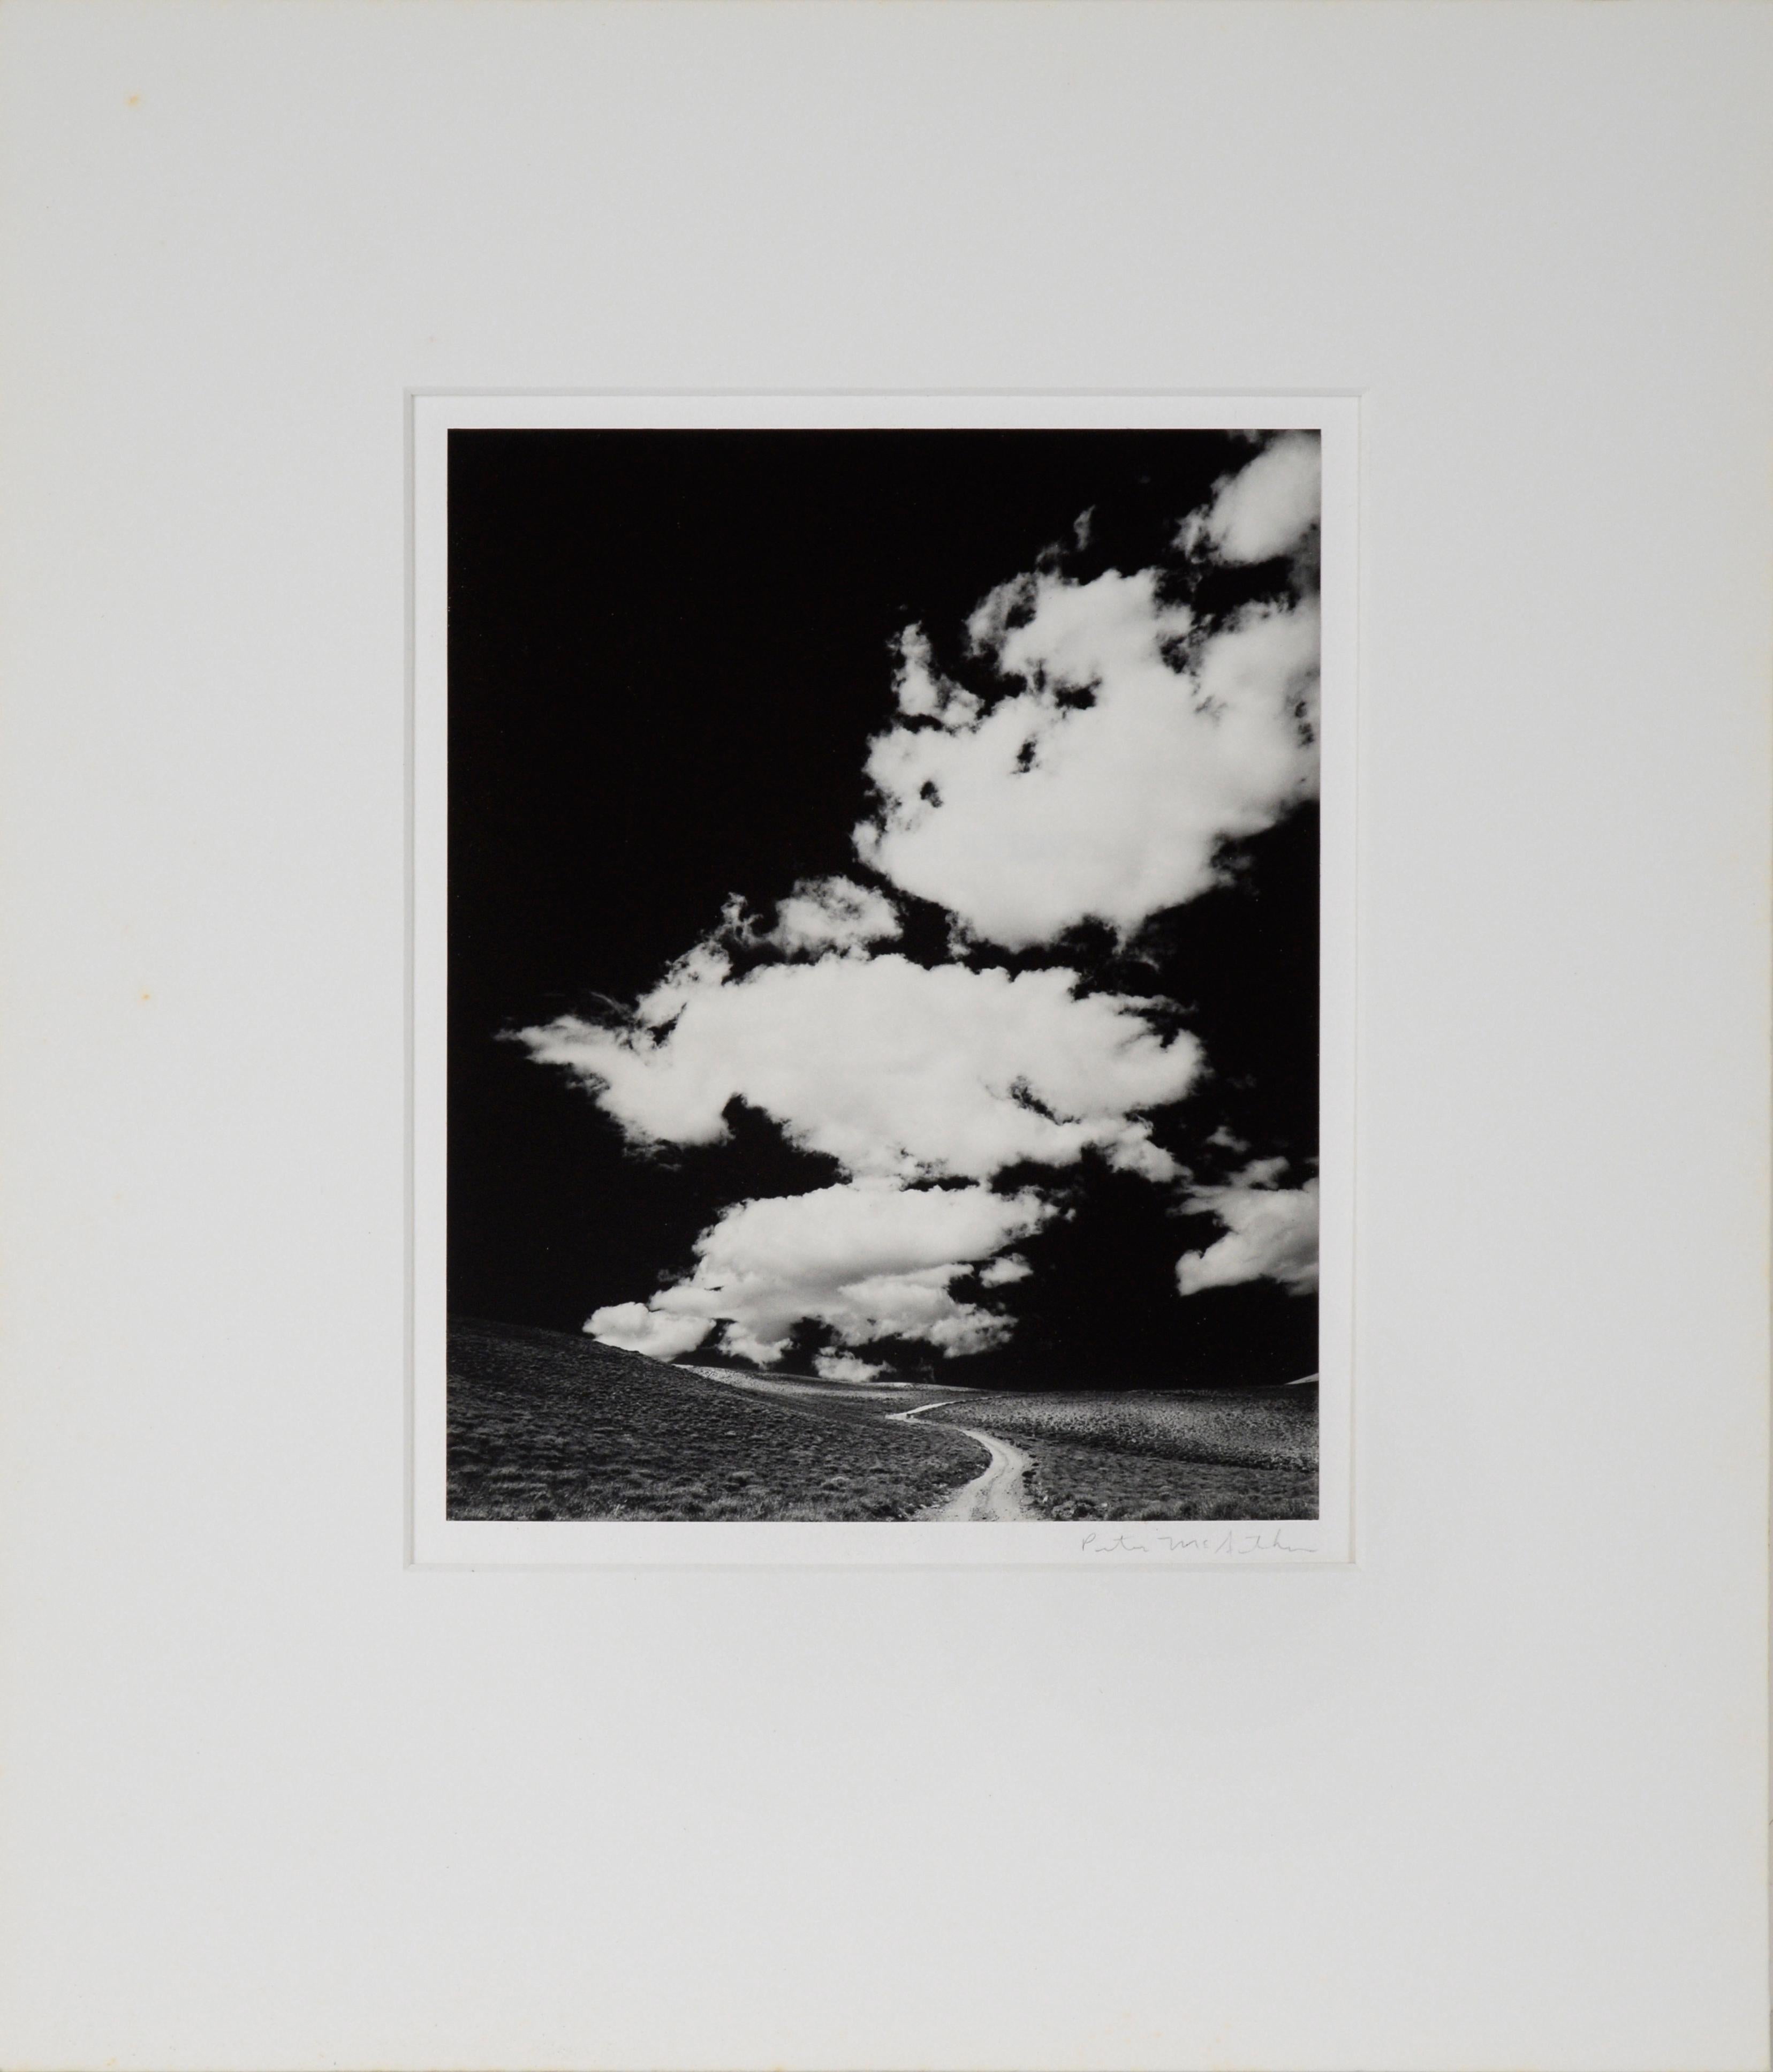 "White Mountains Road With Clouds, 1968" - Black and White Photograph

Black and white photograph depicting a gravel dirt road through the mountains with vibrant white clouds contrasting with the dark sky by Peter McArthur (American, b. 1947).